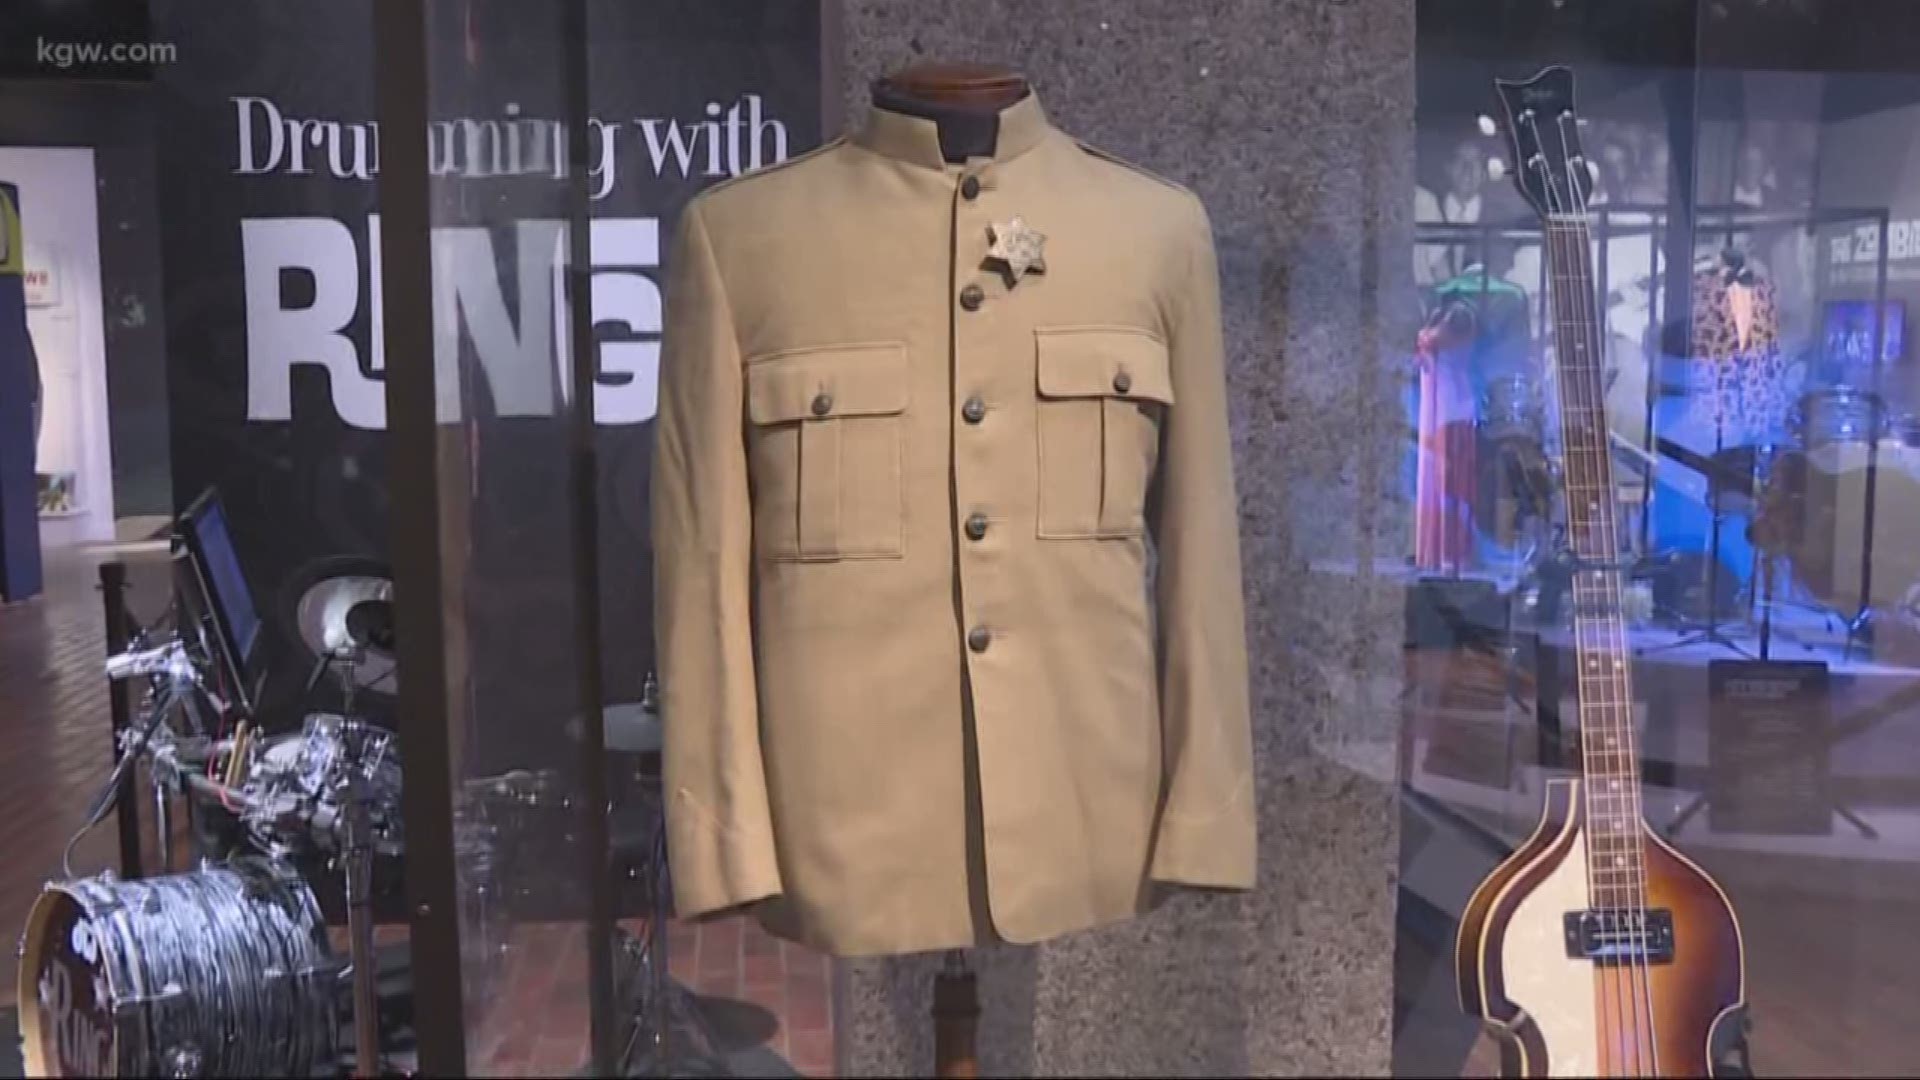 Over 100 items of Beatles memorabilia will be on exhibit, including the jacket Paul McCartney wore at the Shea Stadium concert in 1965 that he wore again at Portland's Memorial Coliseum.